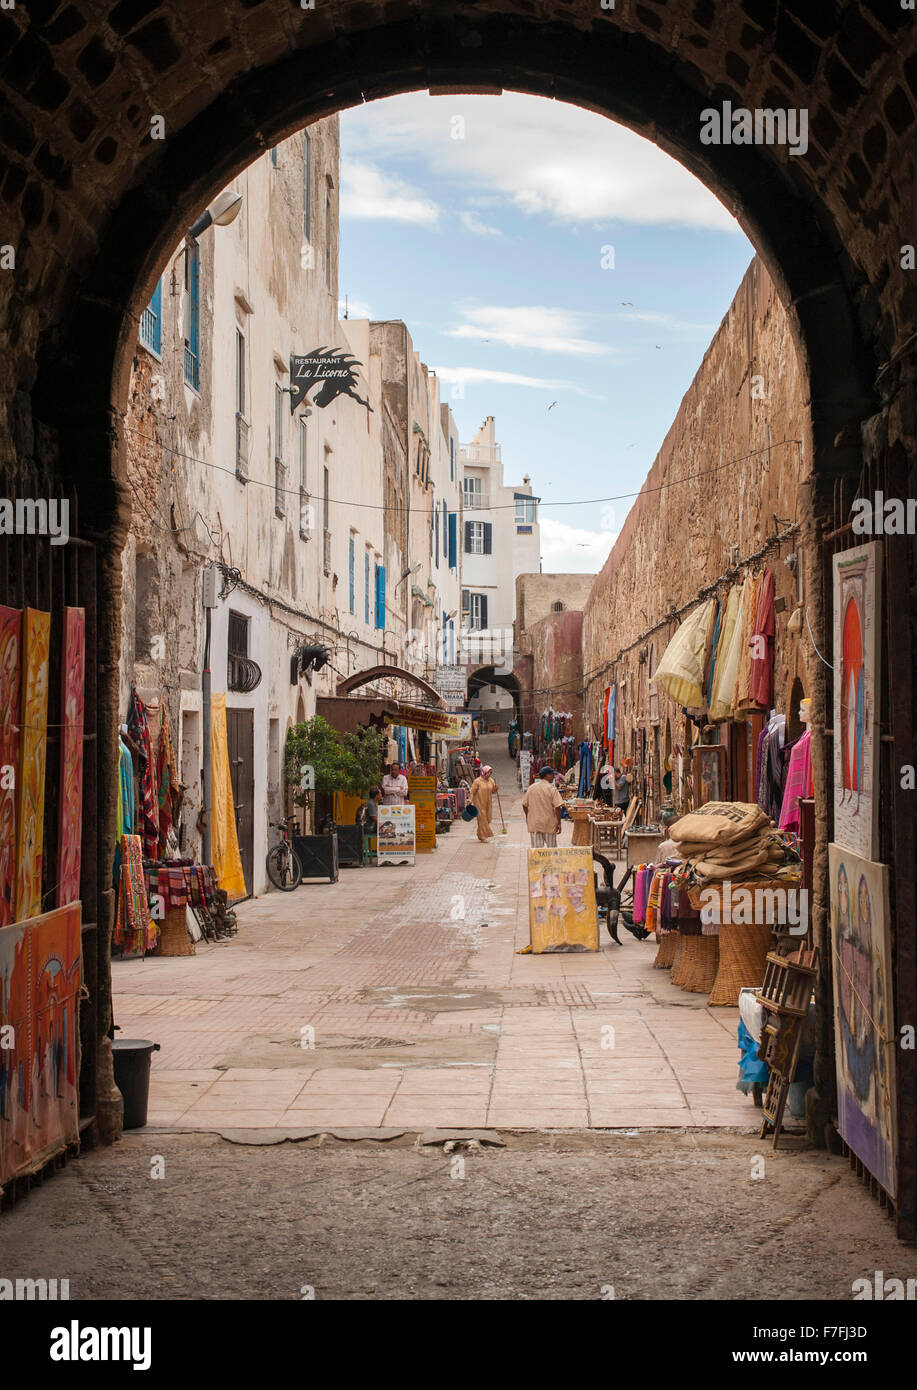 Alleyway in the old town Medina in Essaouira, Morocco. Stock Photo